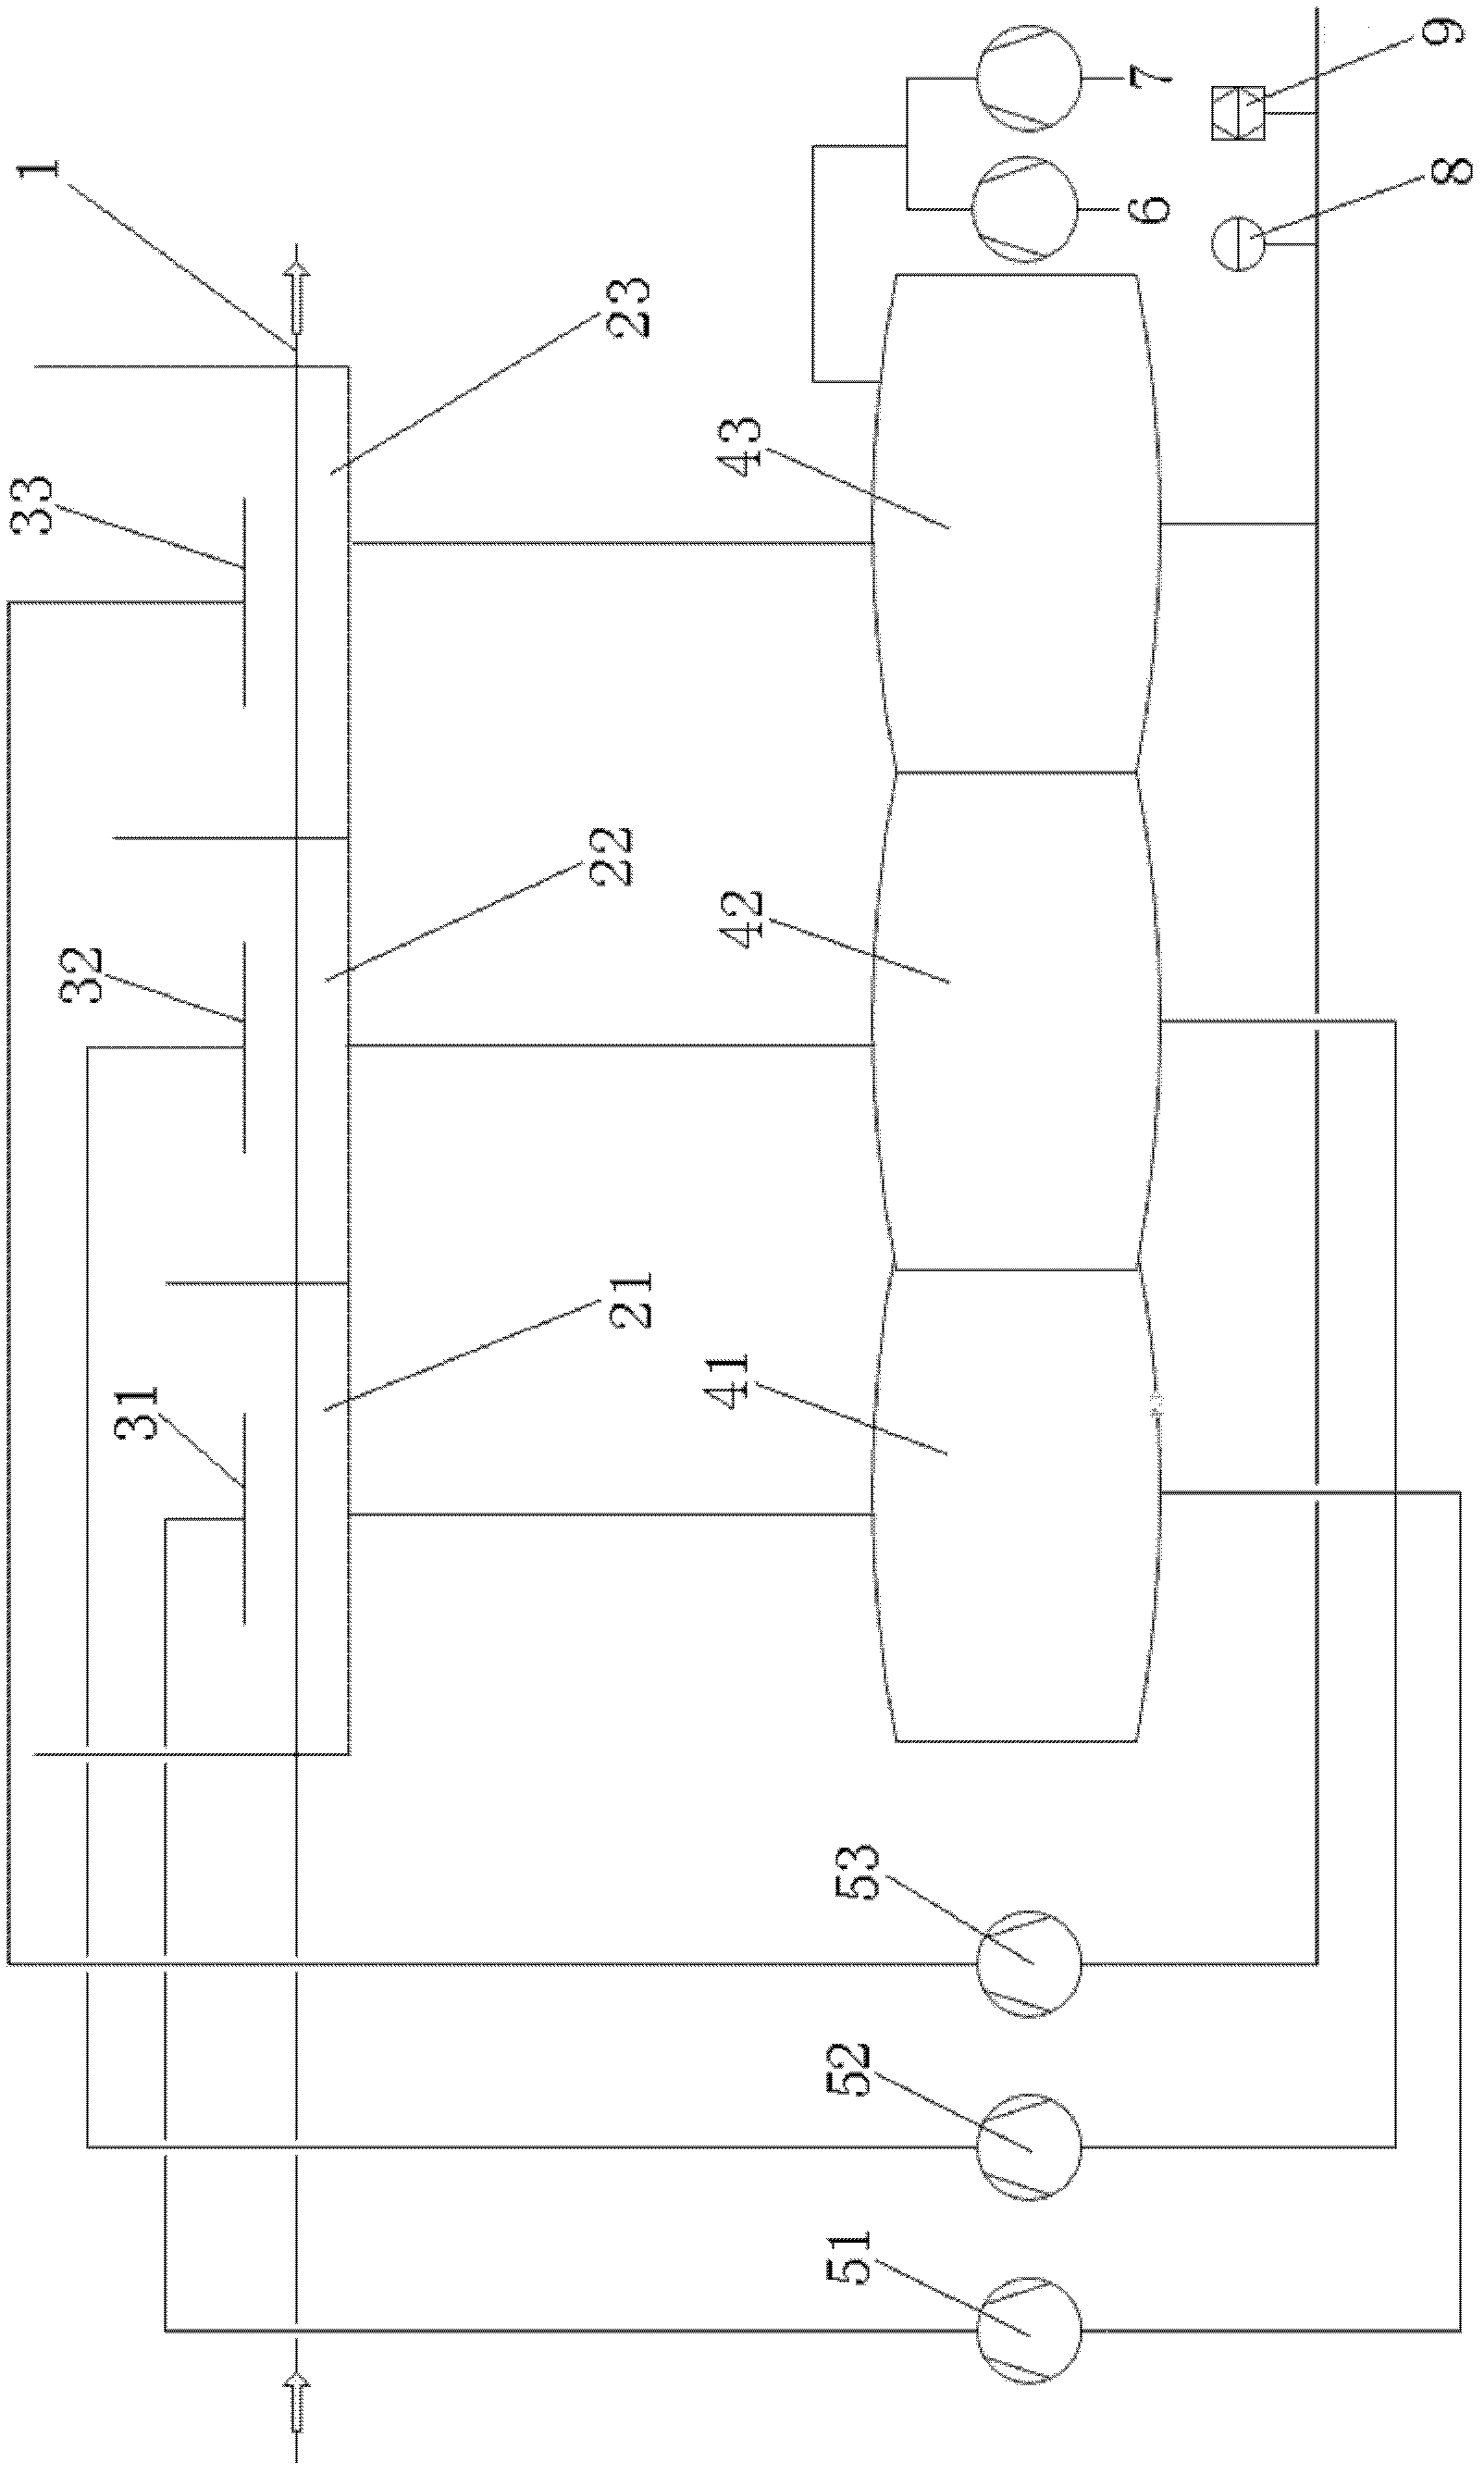 An acid concentration controlling method for a continuous annealing furnace